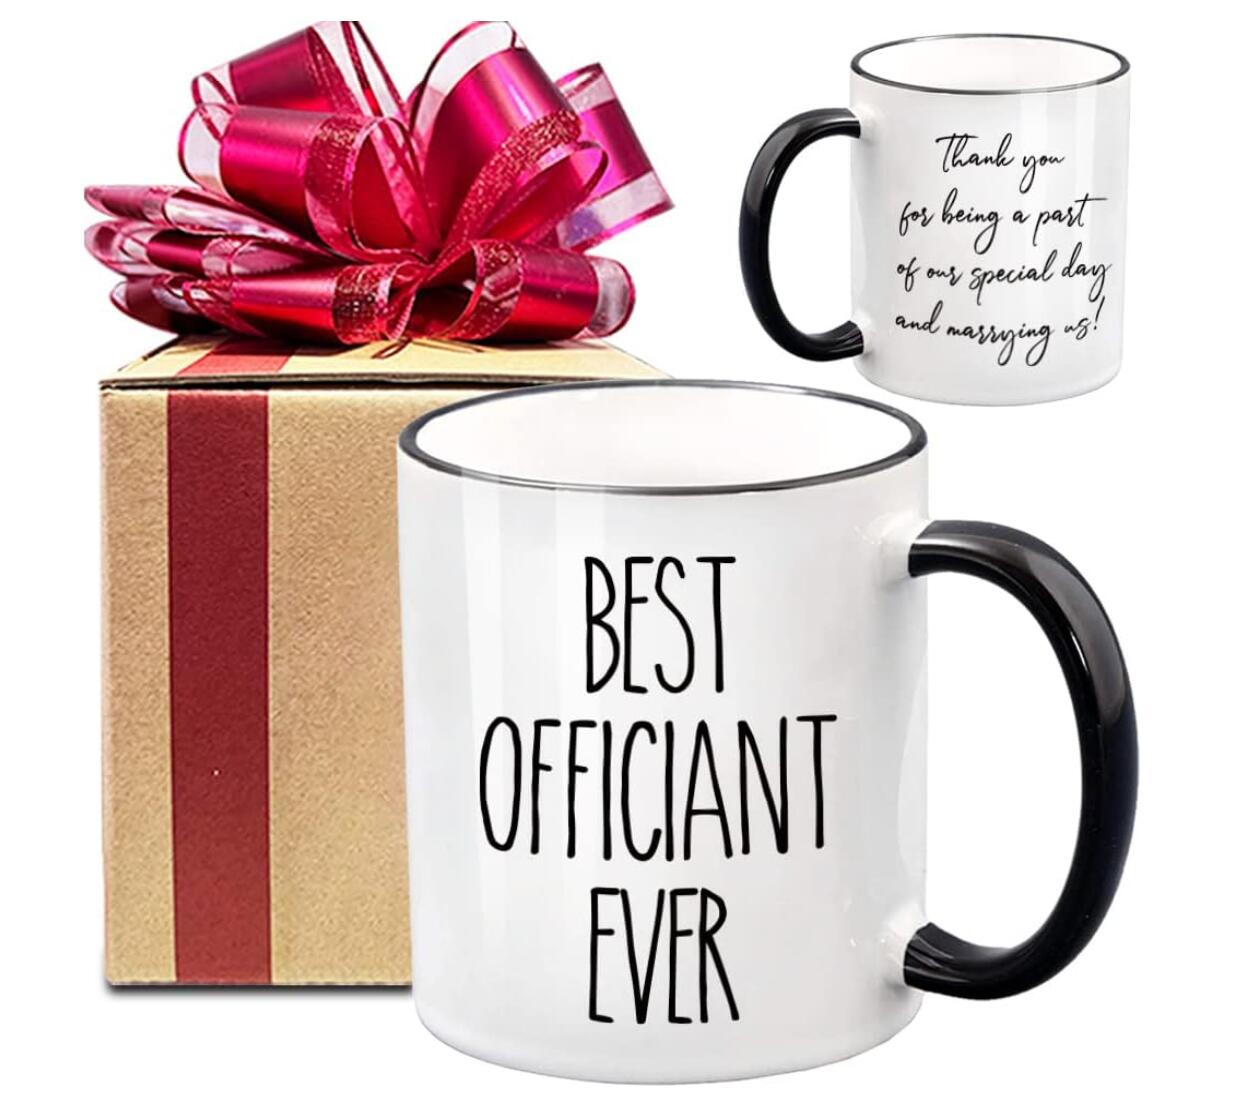 Best Officiant Ever Coffee Mug Special Person Gift Cup